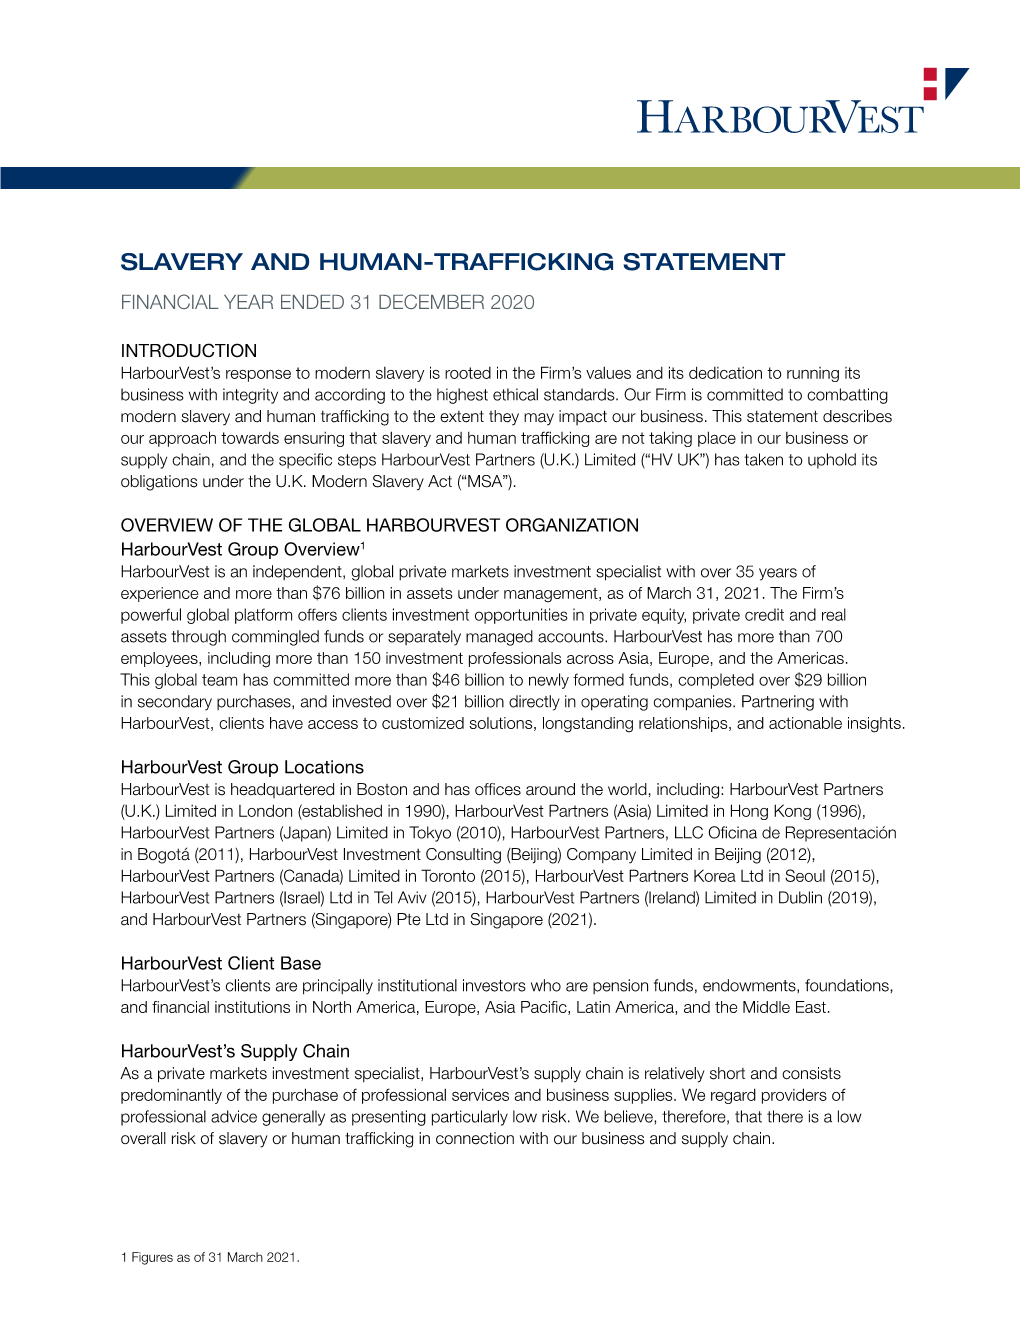 Slavery and Human-Trafficking Statement Financial Year Ended 31 December 2020